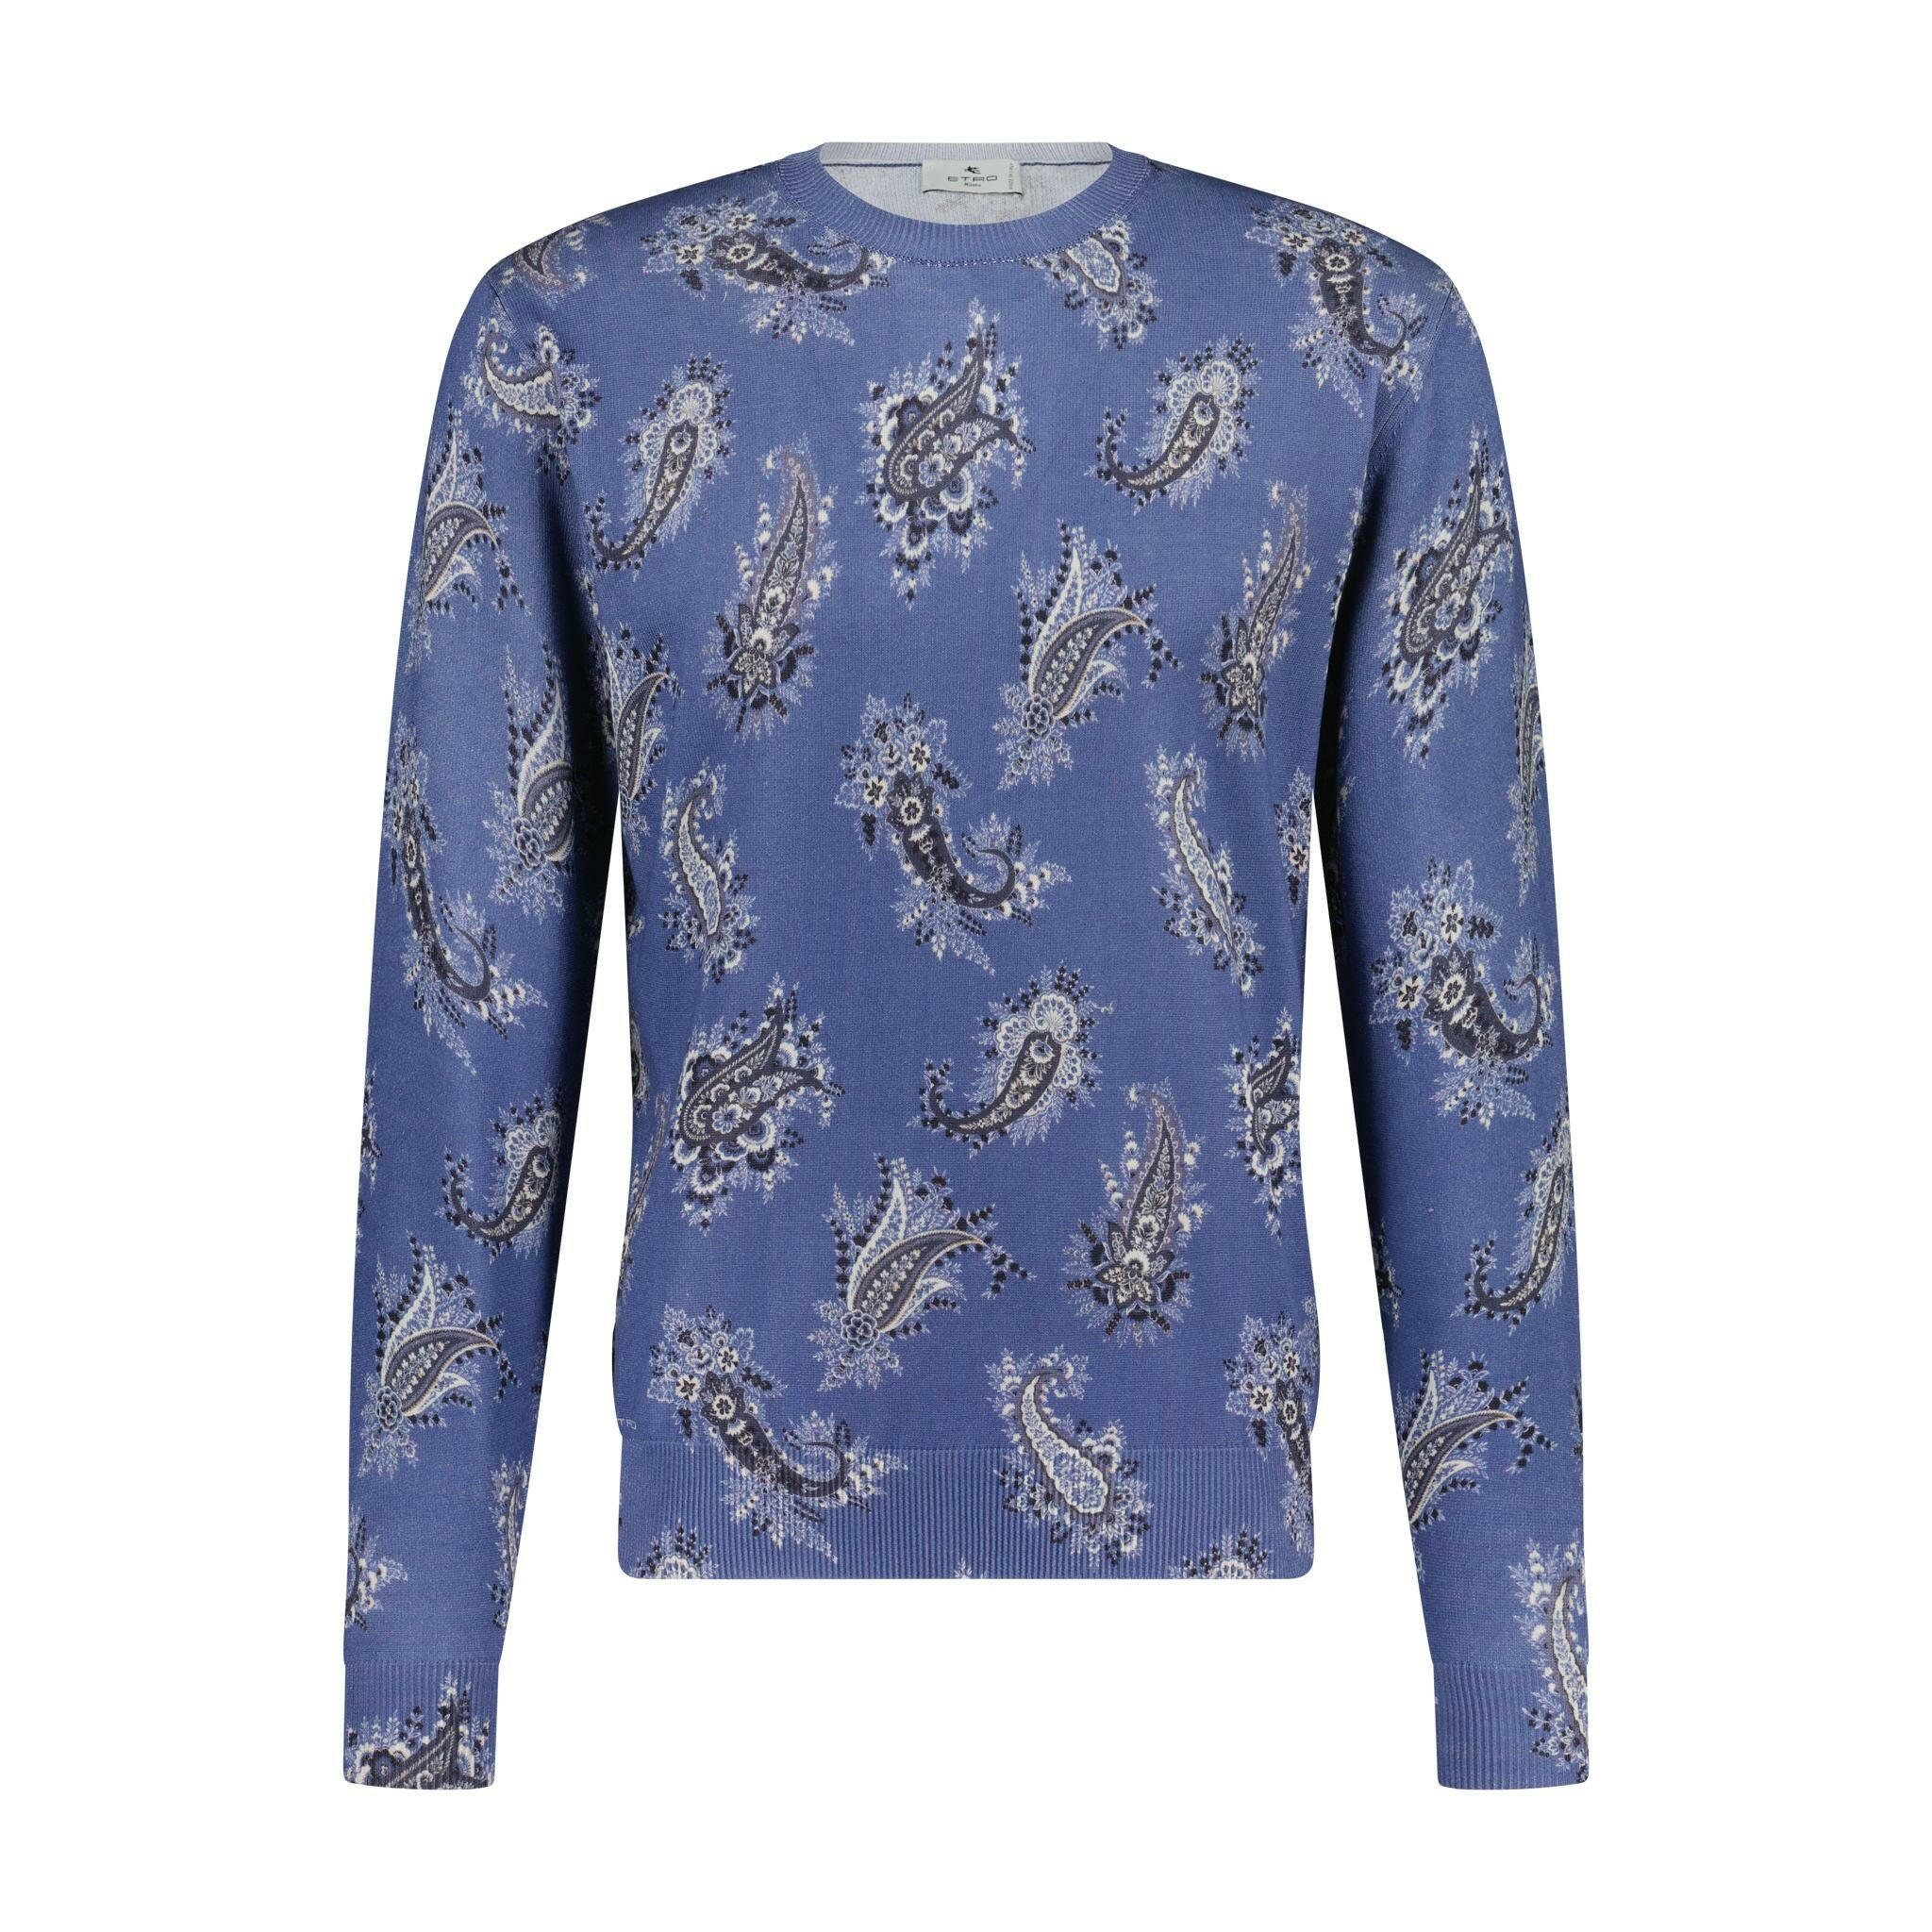 Pullover mit Paisley-Muster